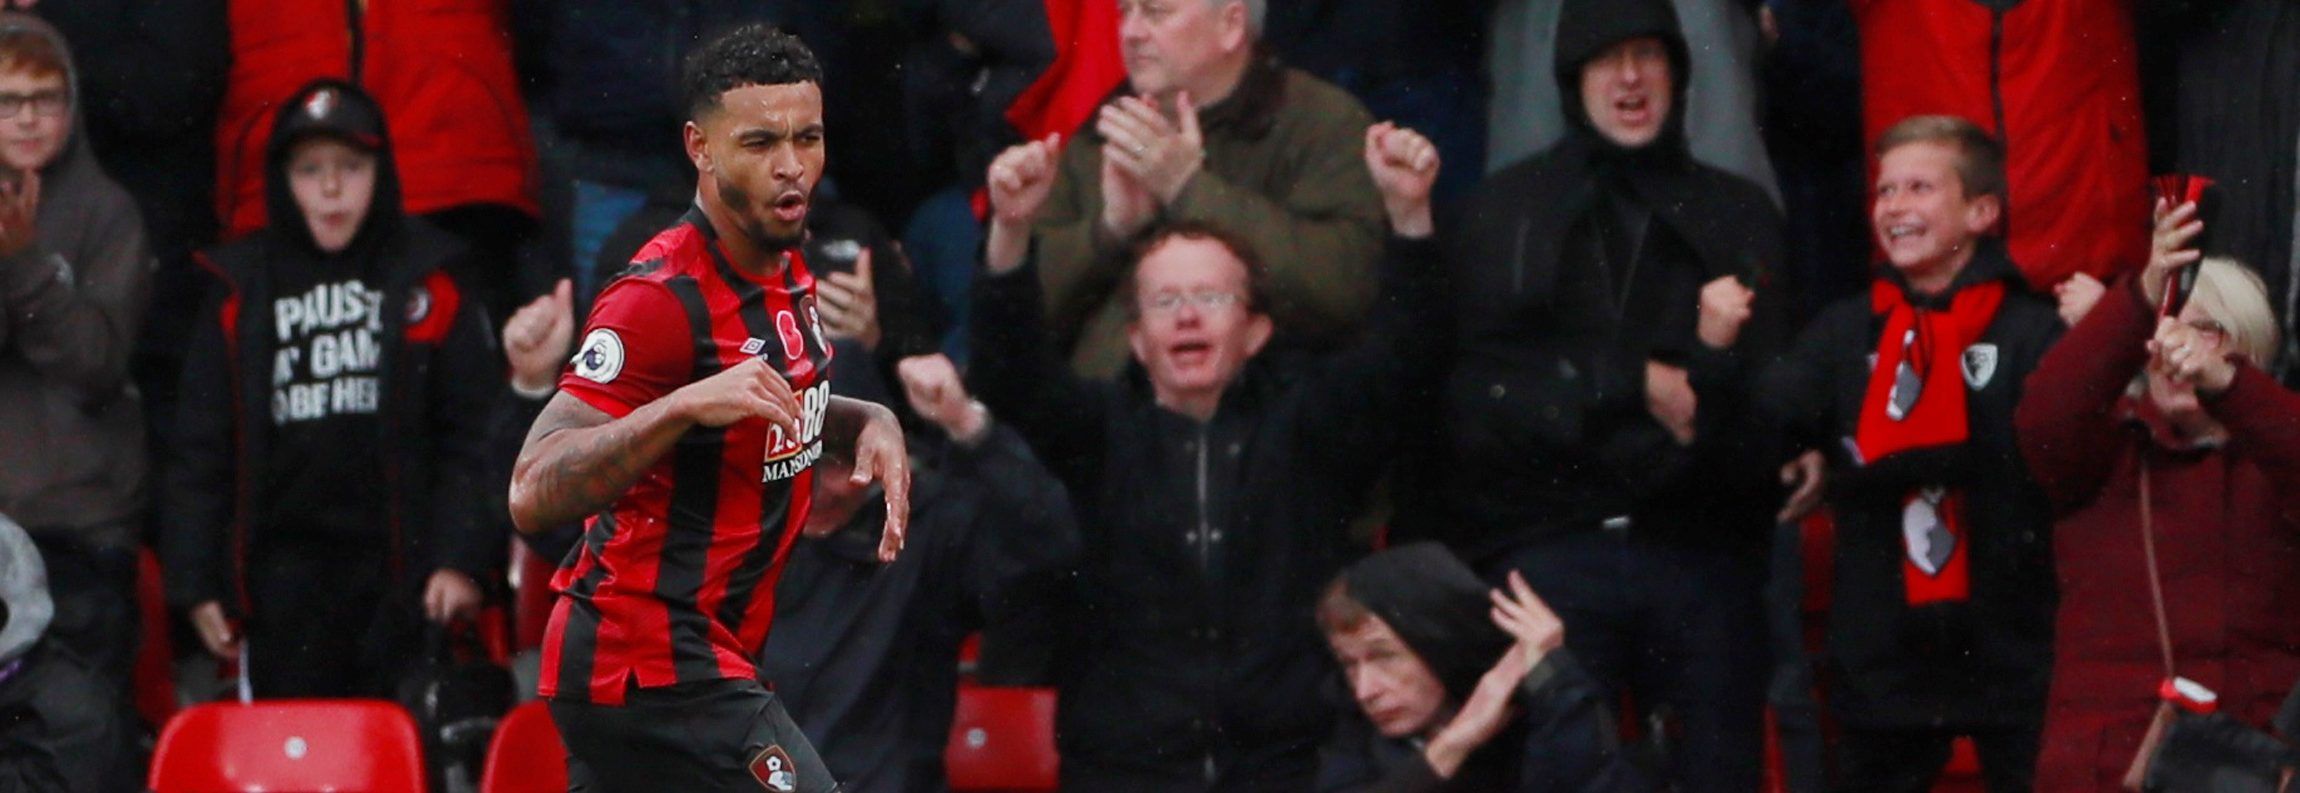 Soccer Football - Premier League - AFC Bournemouth v Manchester United - Vitality Stadium, Bournemouth, Britain - November 2, 2019  Bournemouth's Joshua King celebrates scoring their first goal    Action Images via Reuters/Andrew Couldridge  EDITORIAL USE ONLY. No use with unauthorized audio, video, data, fixture lists, club/league logos or 